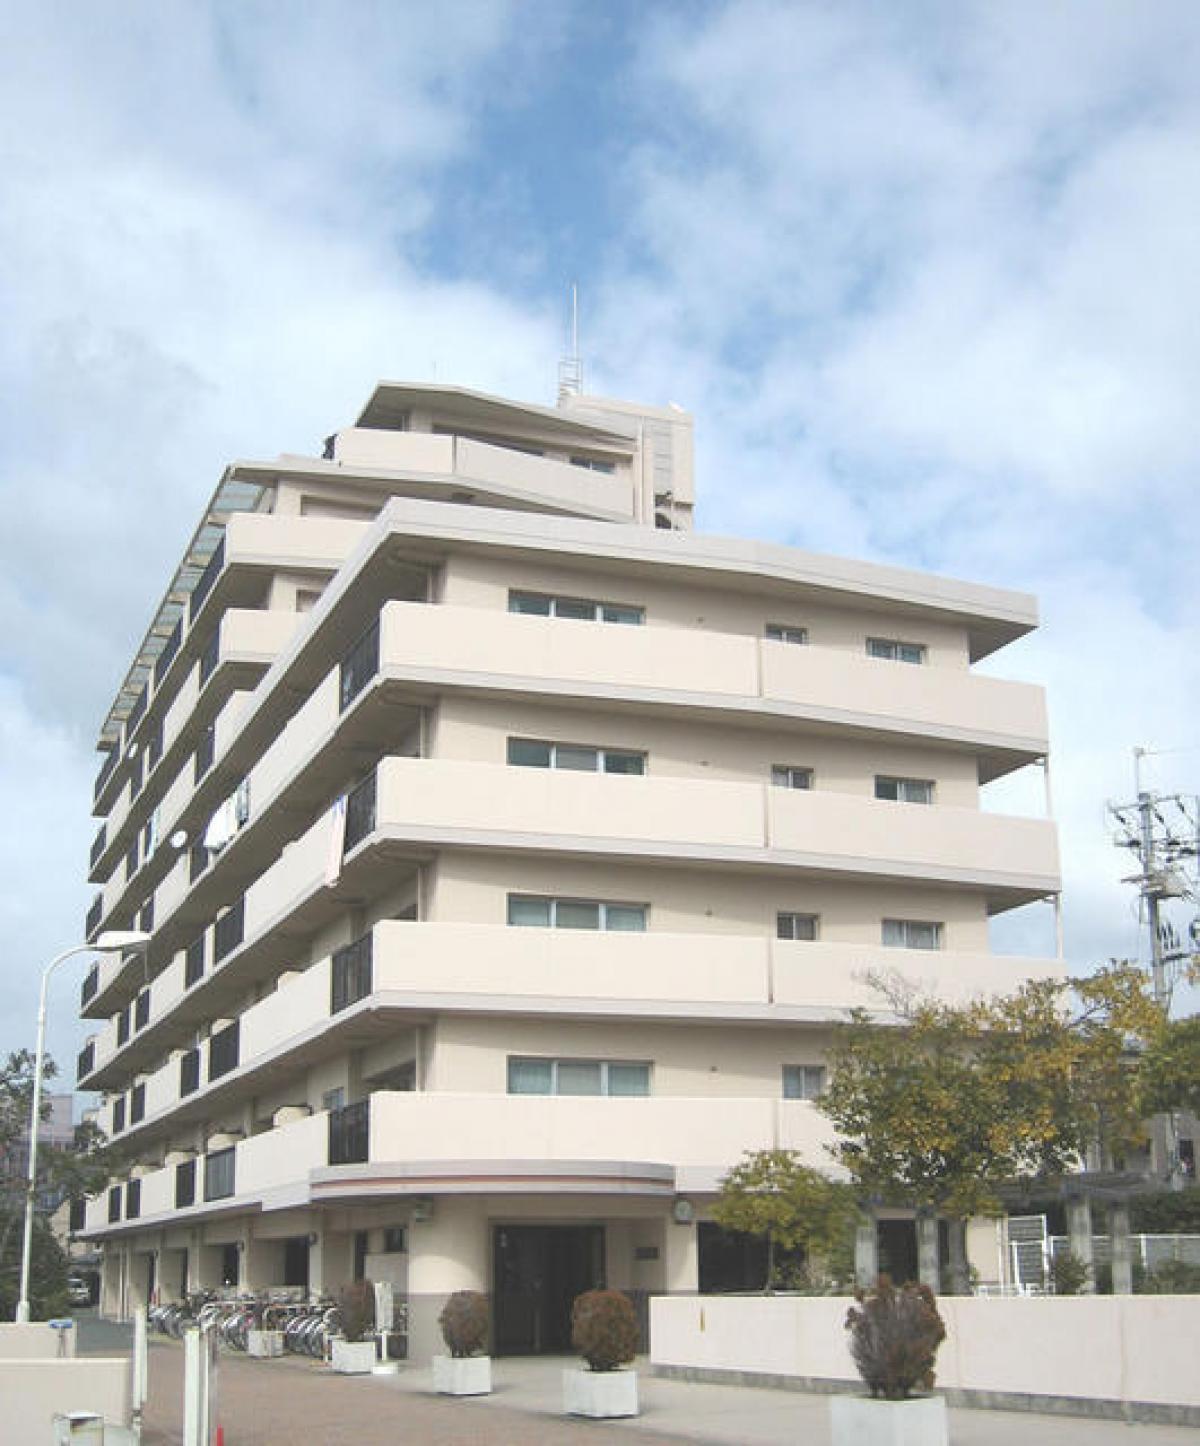 Picture of Apartment For Sale in Izumisano Shi, Osaka, Japan